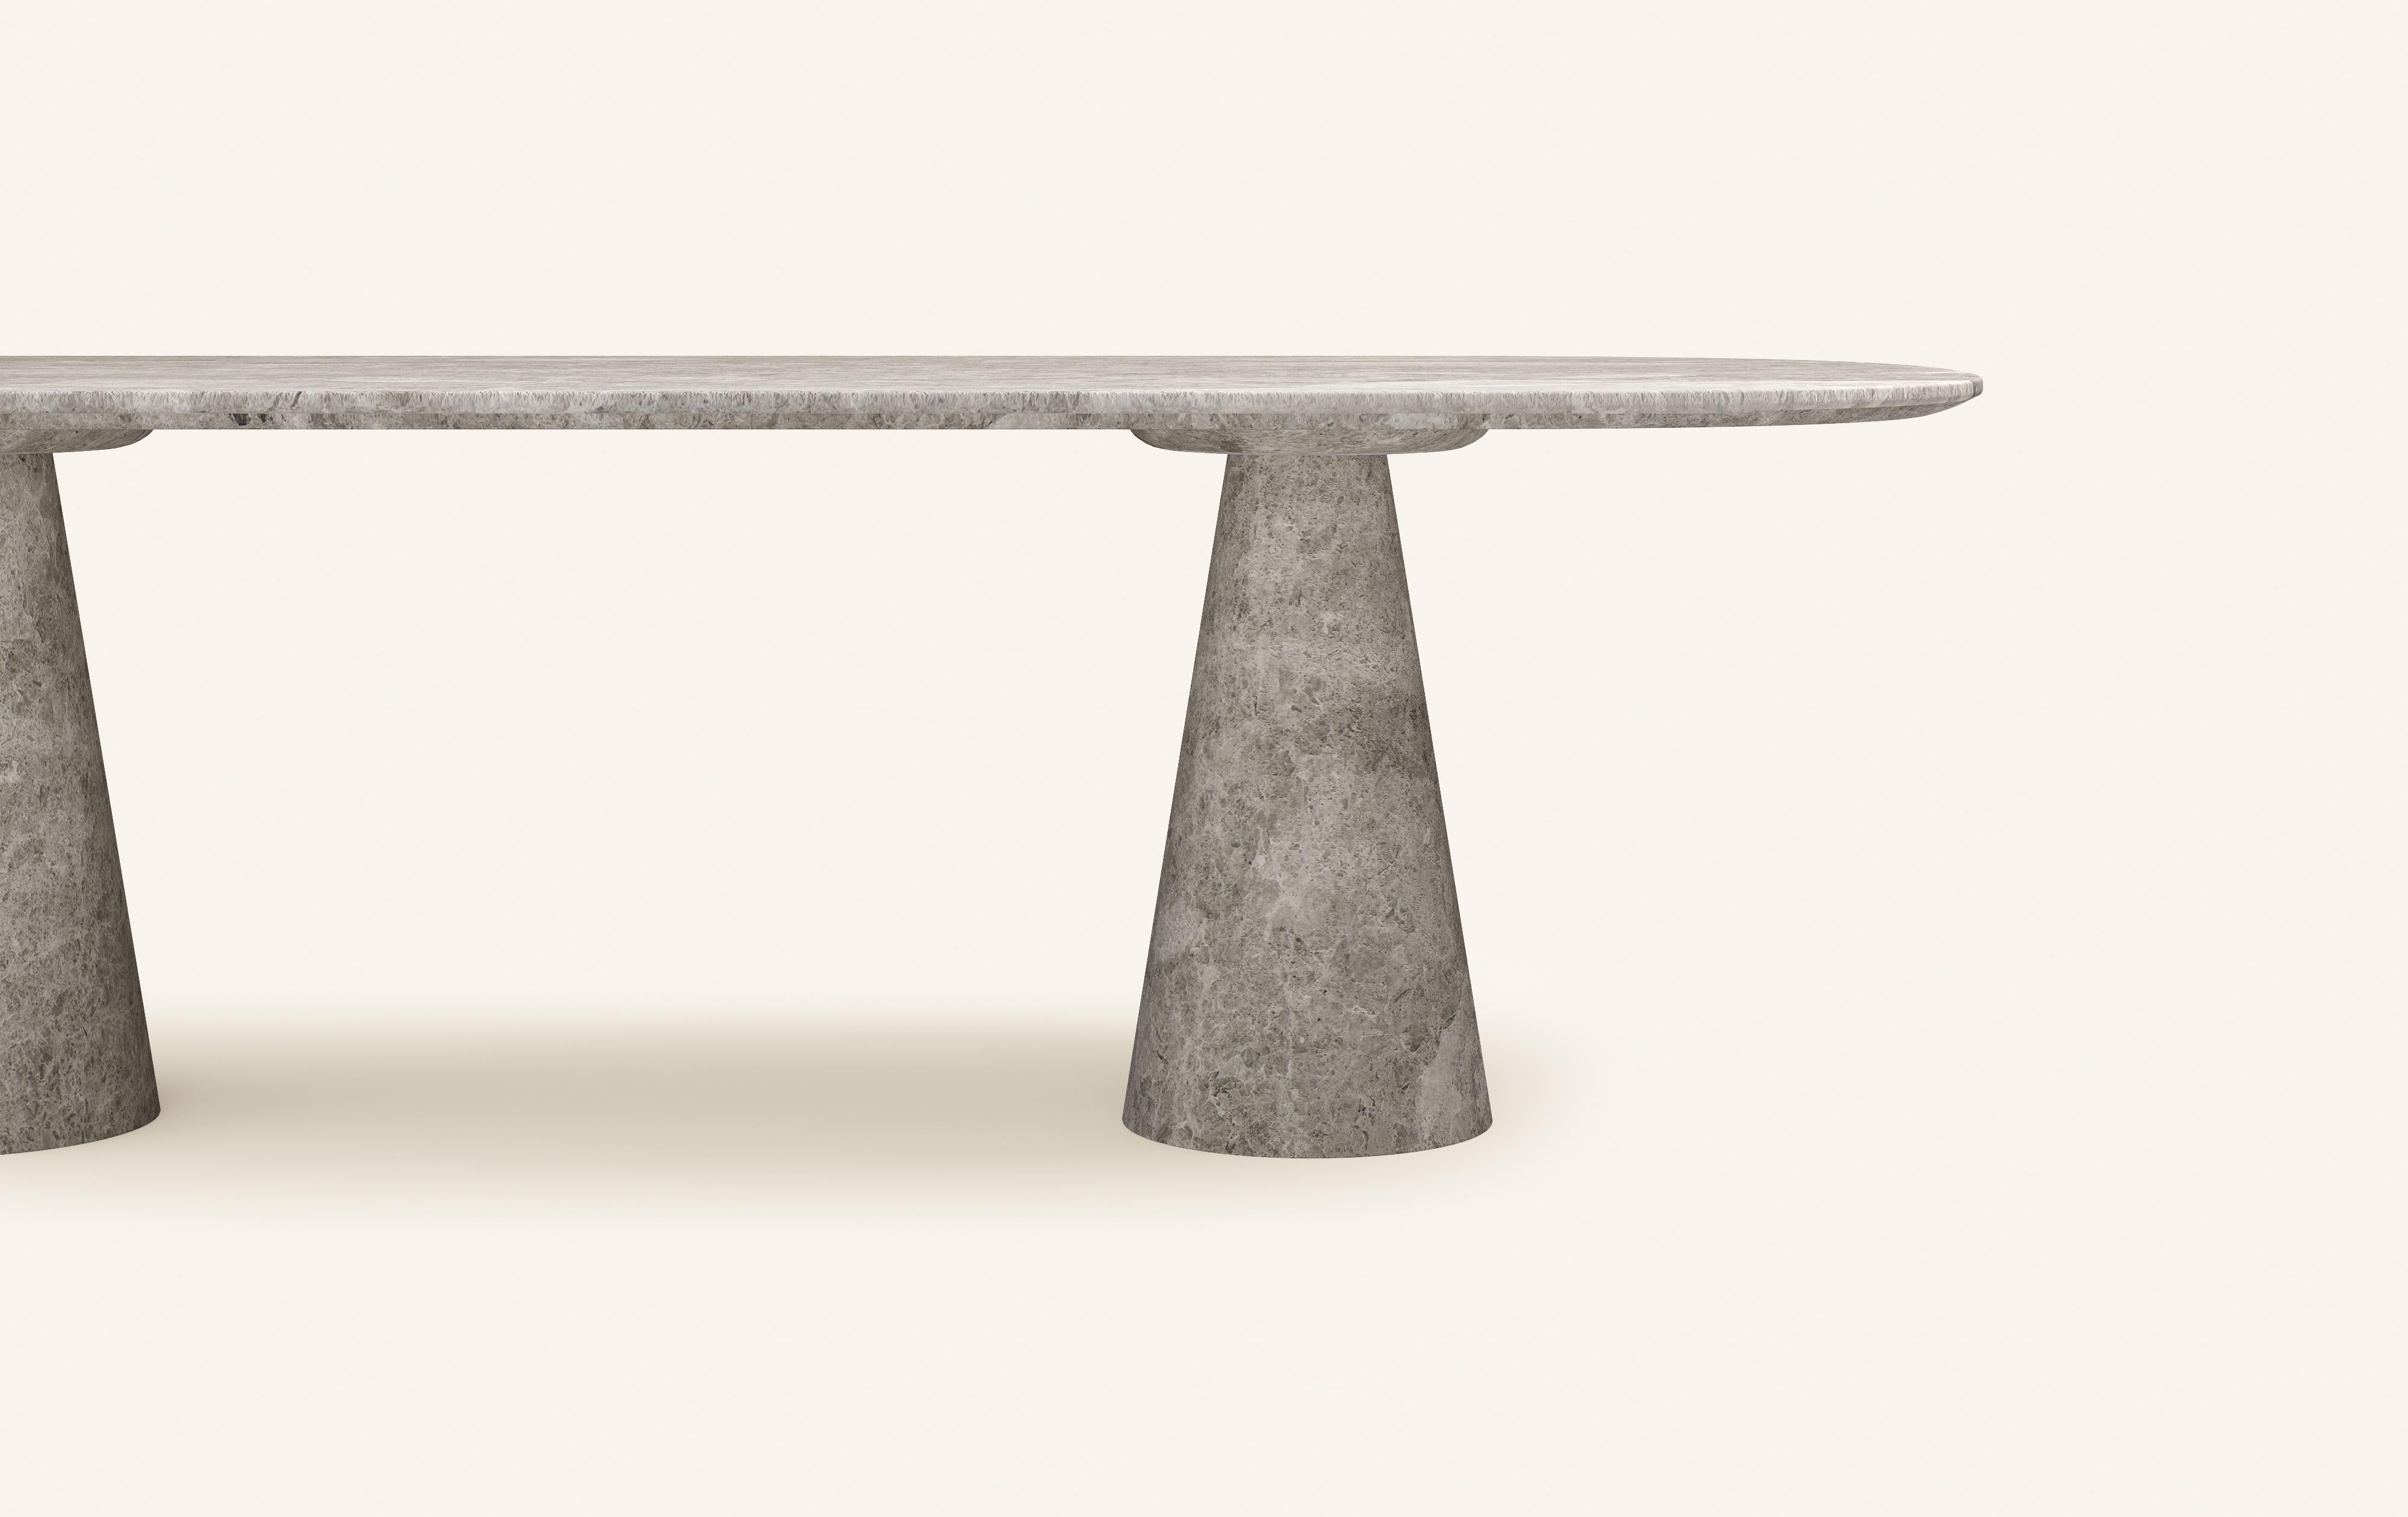 American FORM(LA) Cono Oval Dining Table 108”L x 48”W x 30”H Tundra Gray Marble For Sale